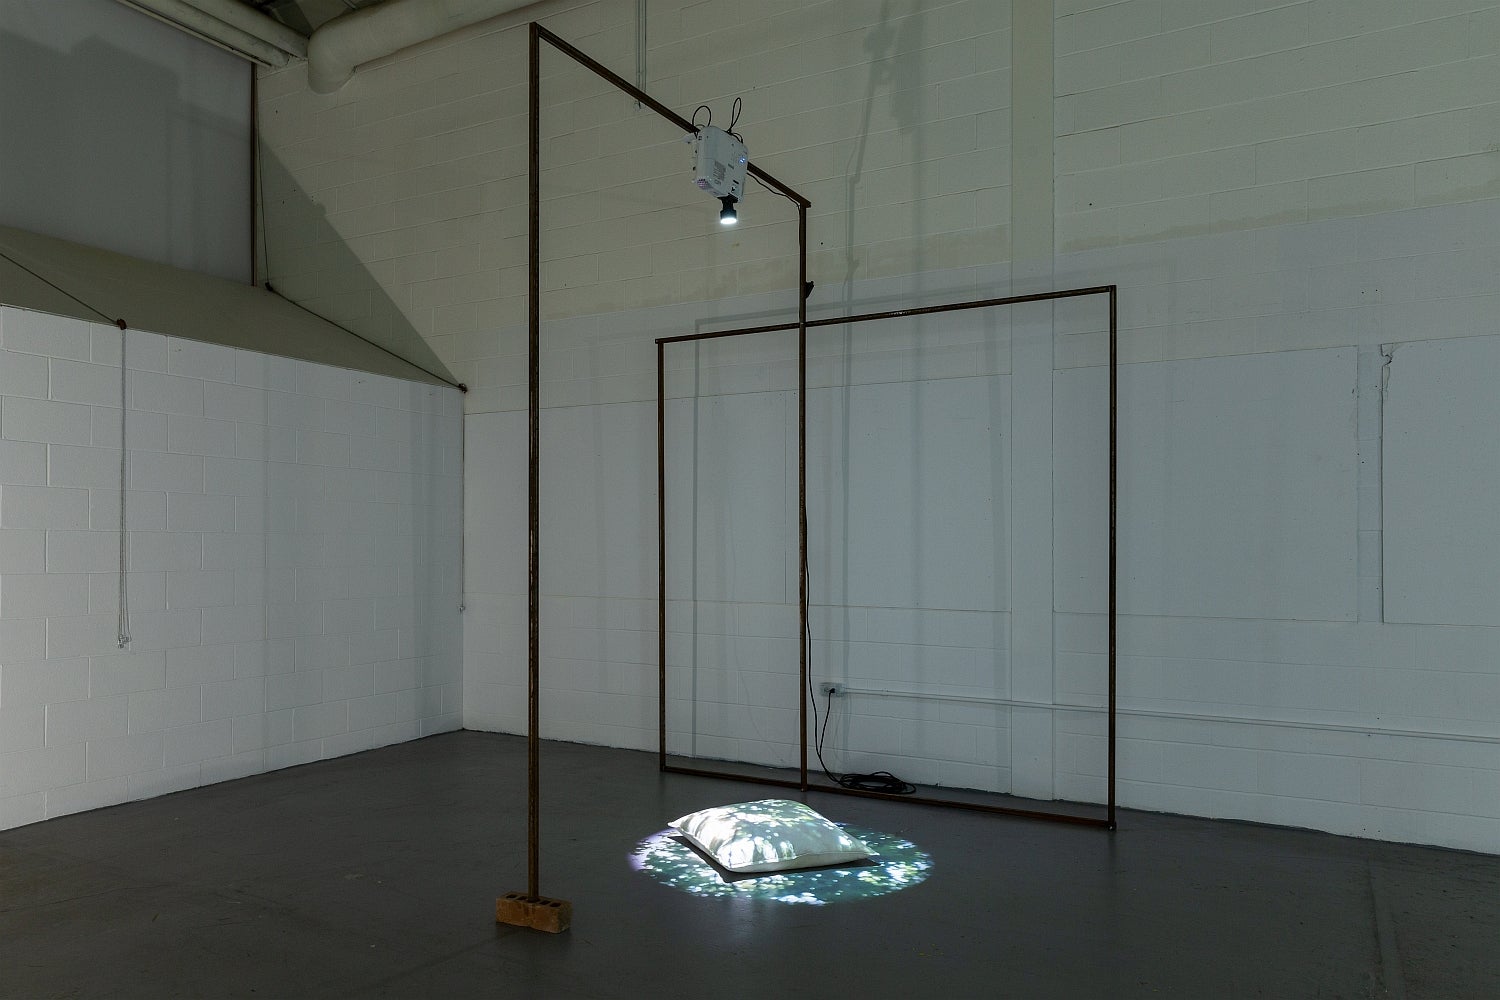 Industrial space with artwork. Metal frame supports a digital projector shining the image of dappled sunlight on a floor pillow